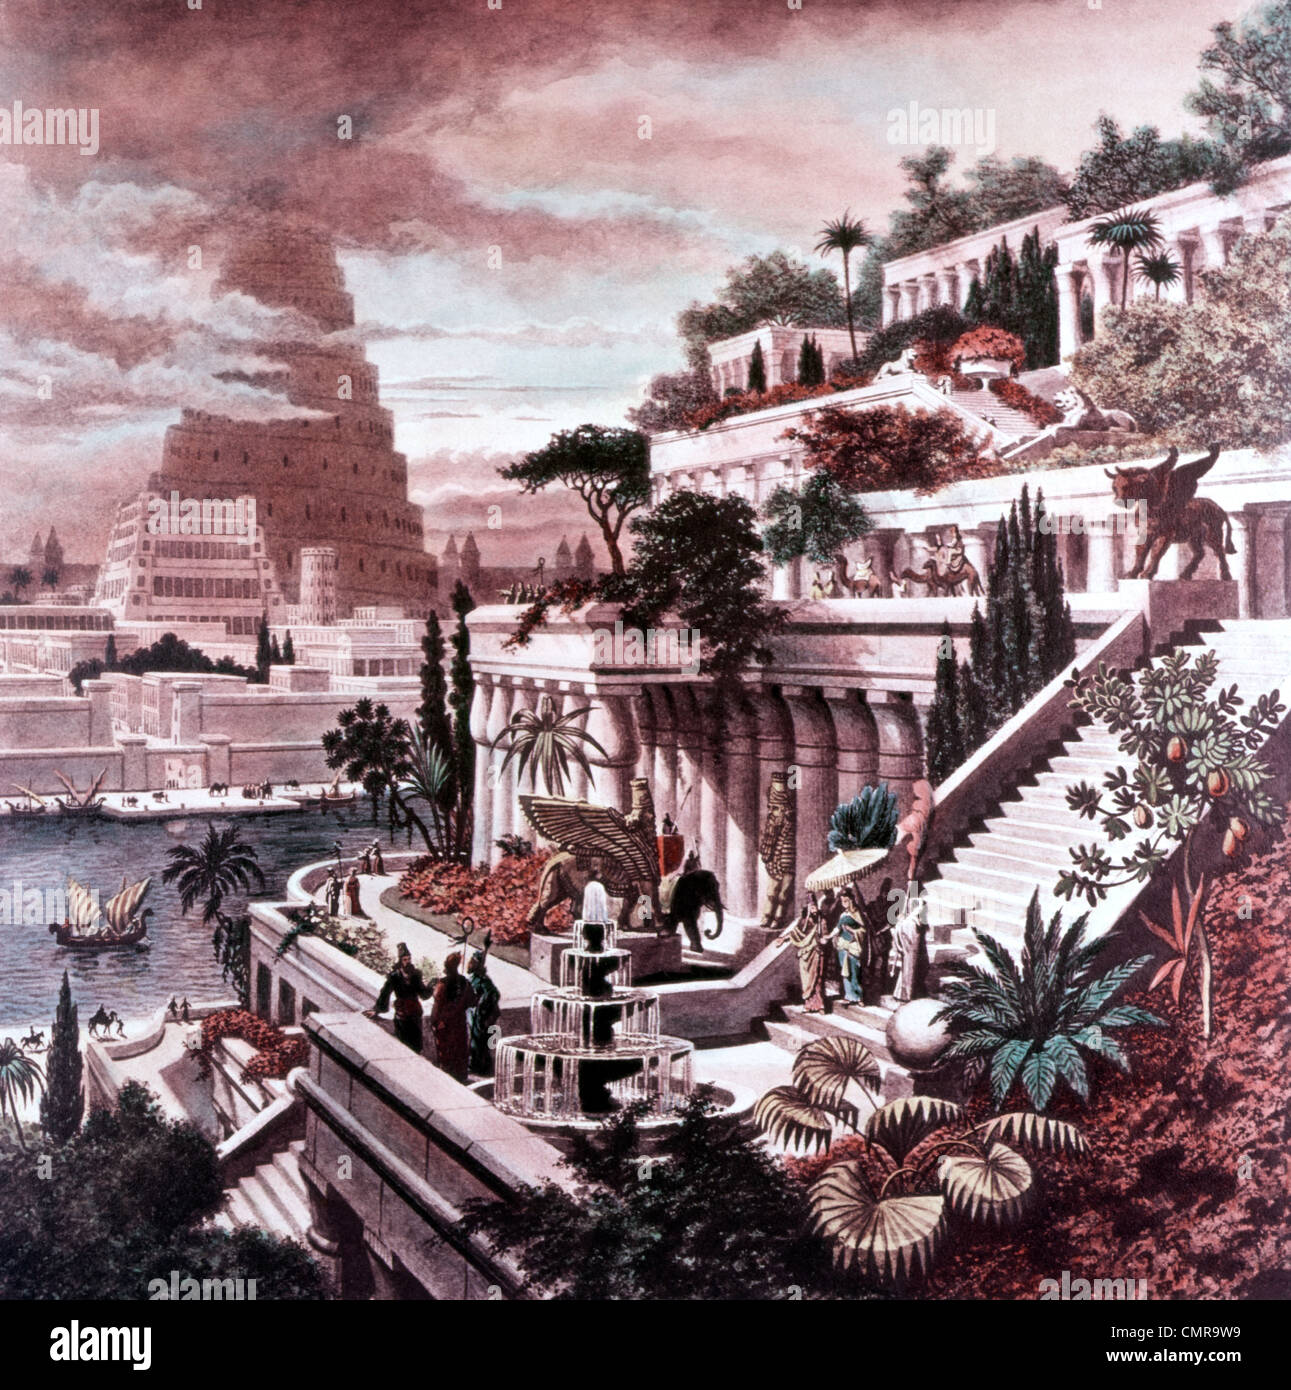 Illustration Seven Wonders Of The Ancient World 600 Bc Hanging